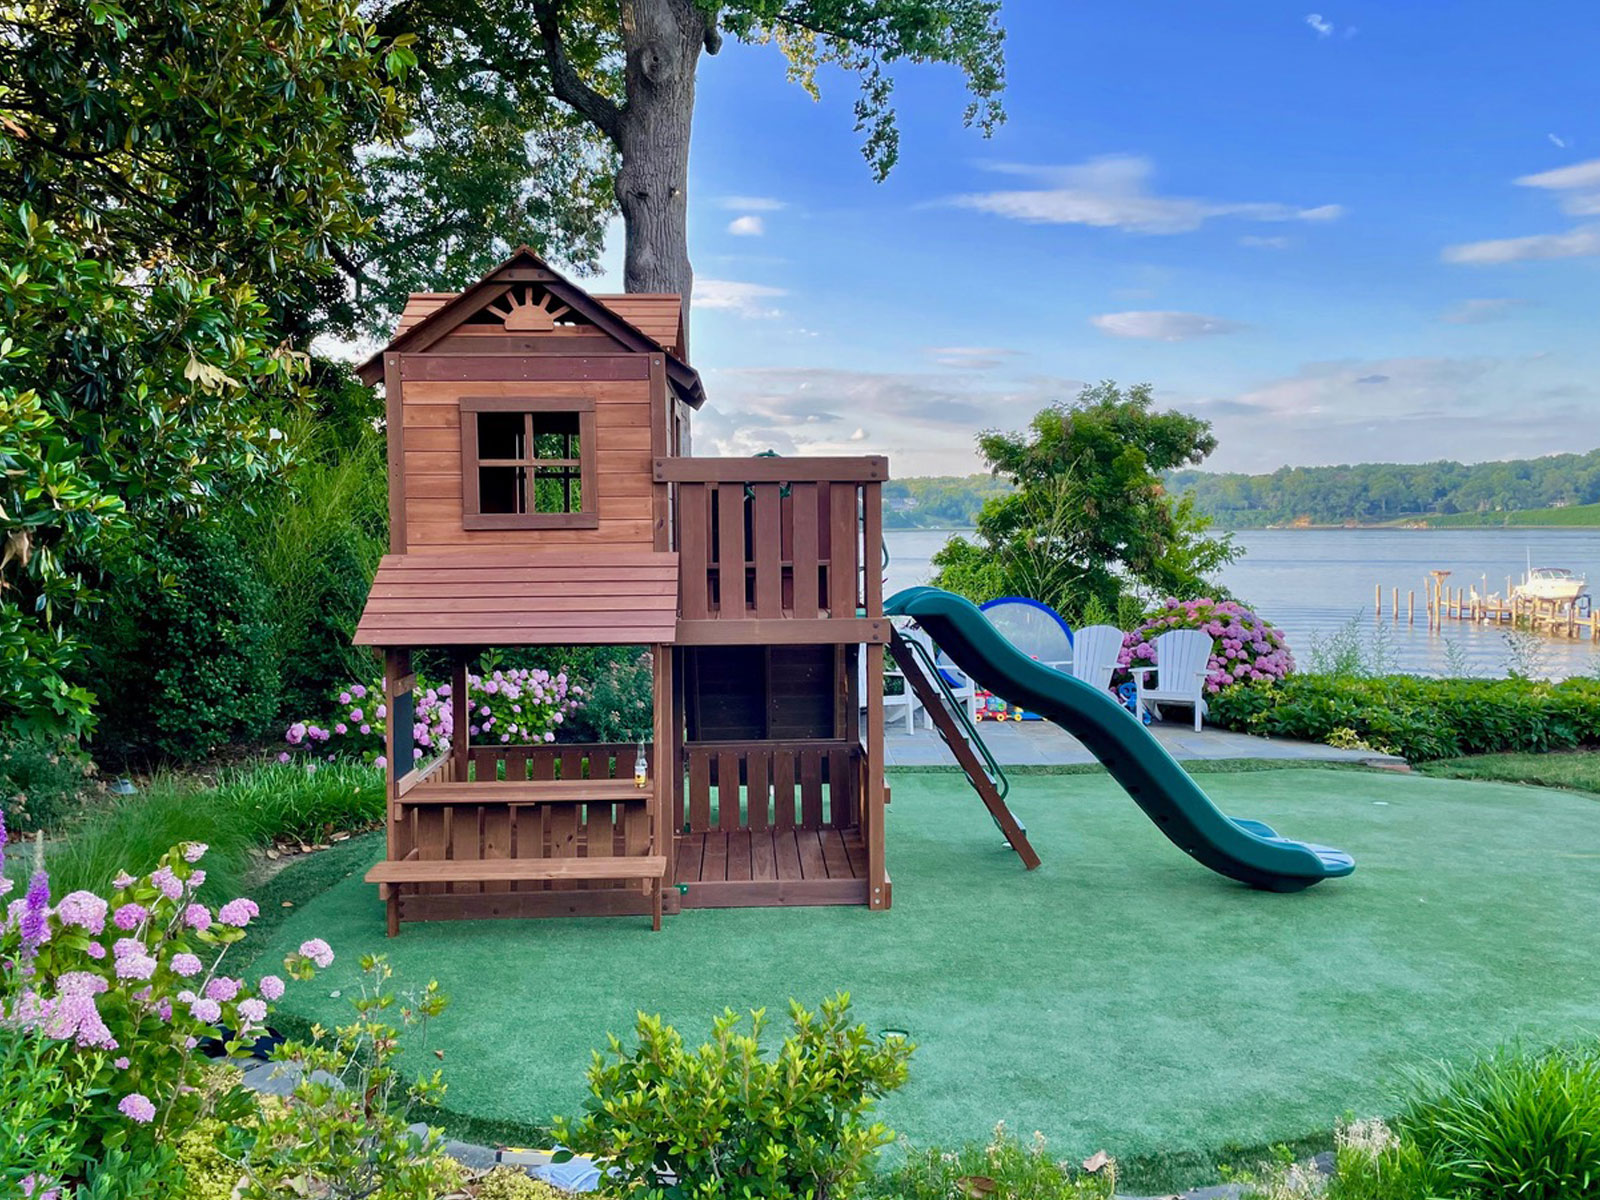 Photo of a Creative Playthings swing set in a customer's yard.